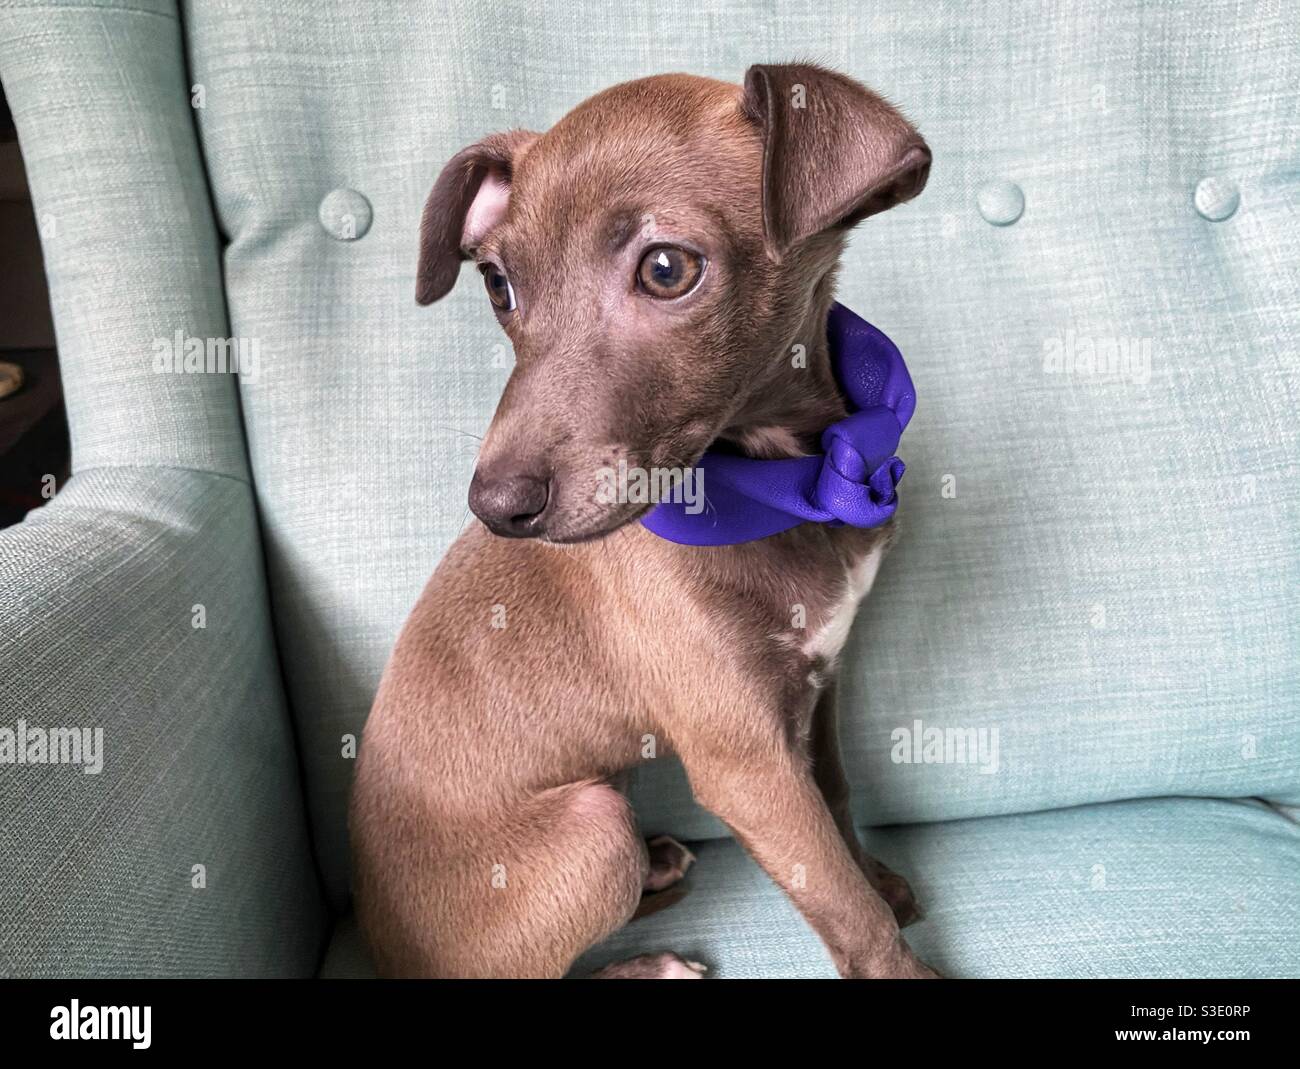 Puppy Italian greyhound with a violet collar on a sofa Stock Photo